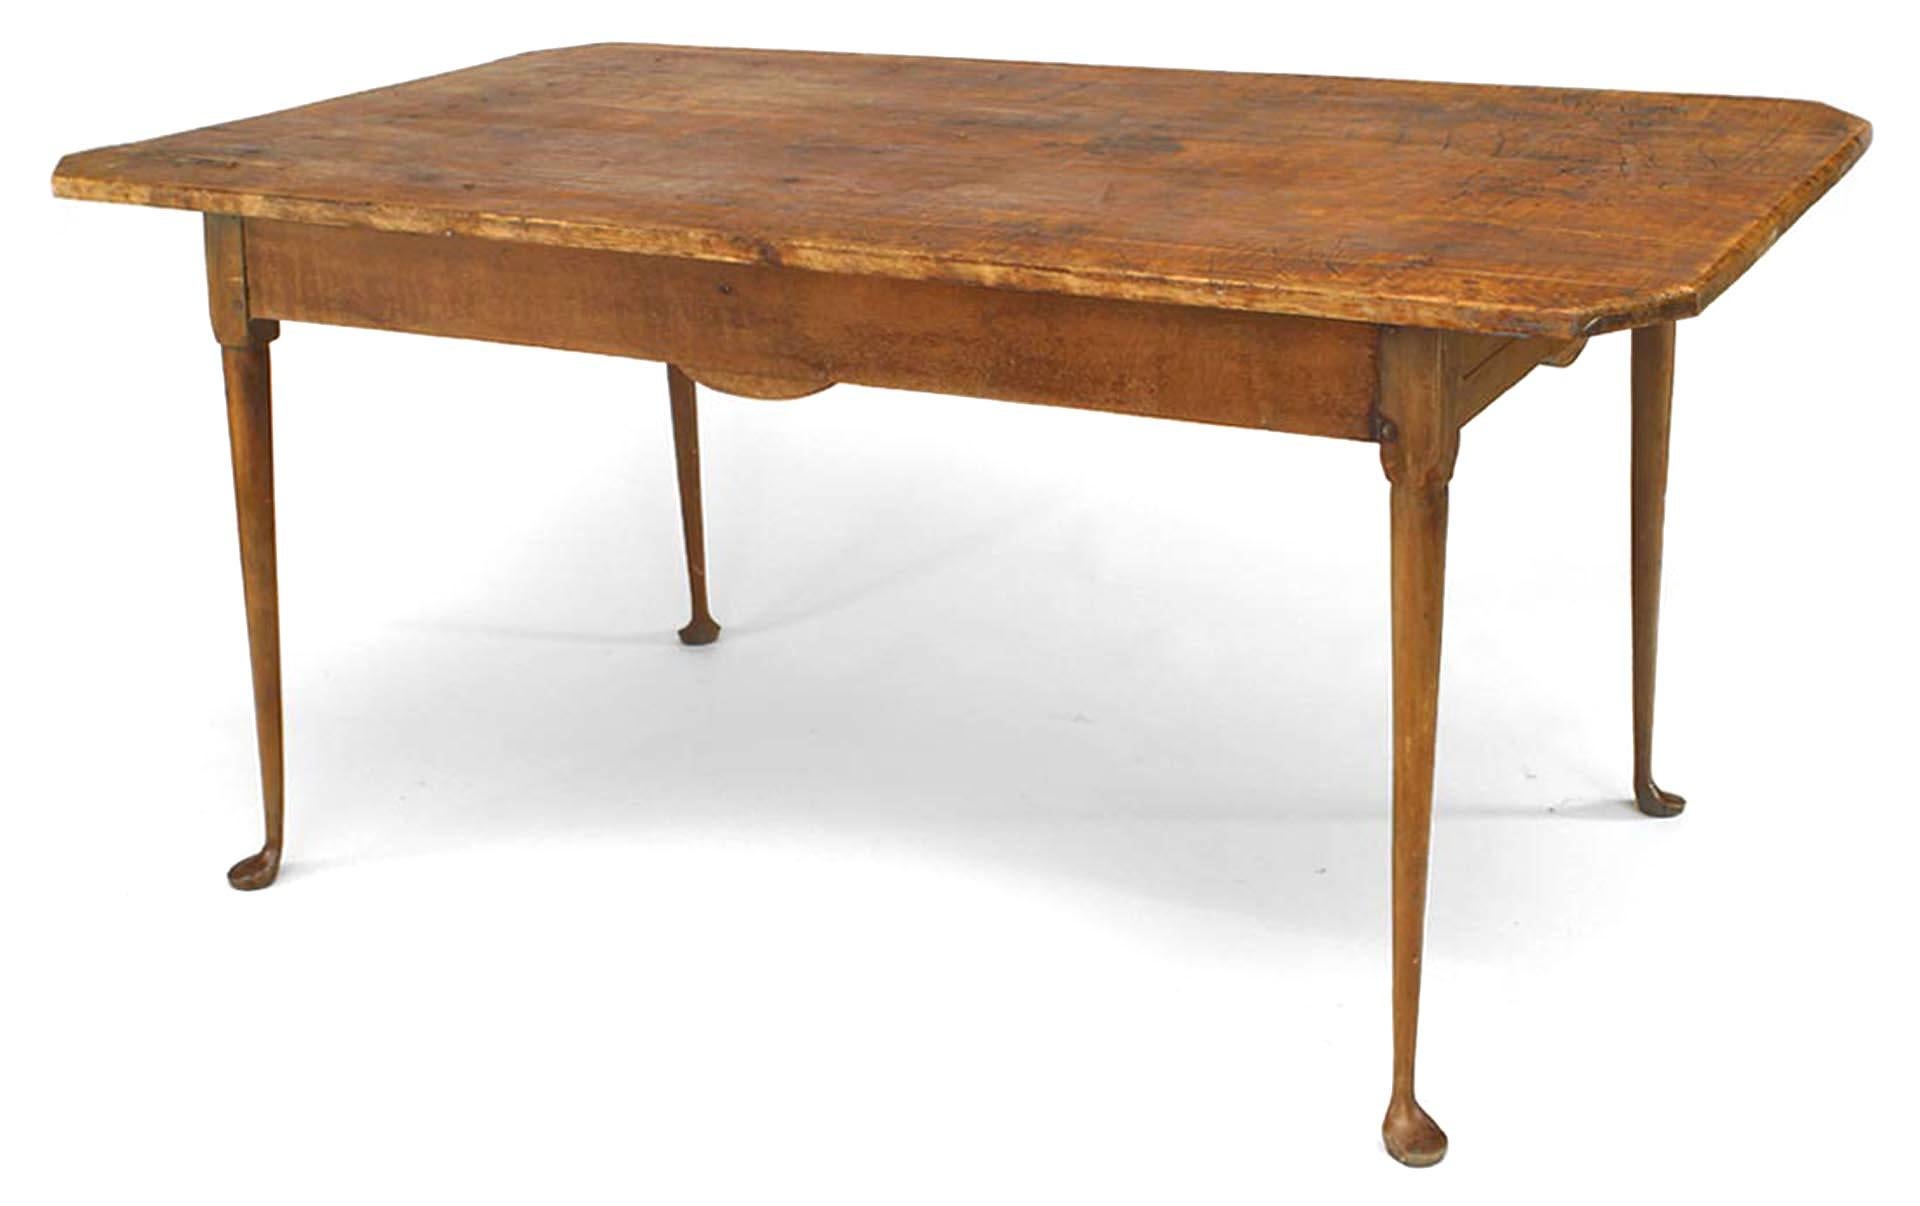 American Country Queen Anne-style (18th Century) North Carolina rectangular dining table with pine top.
